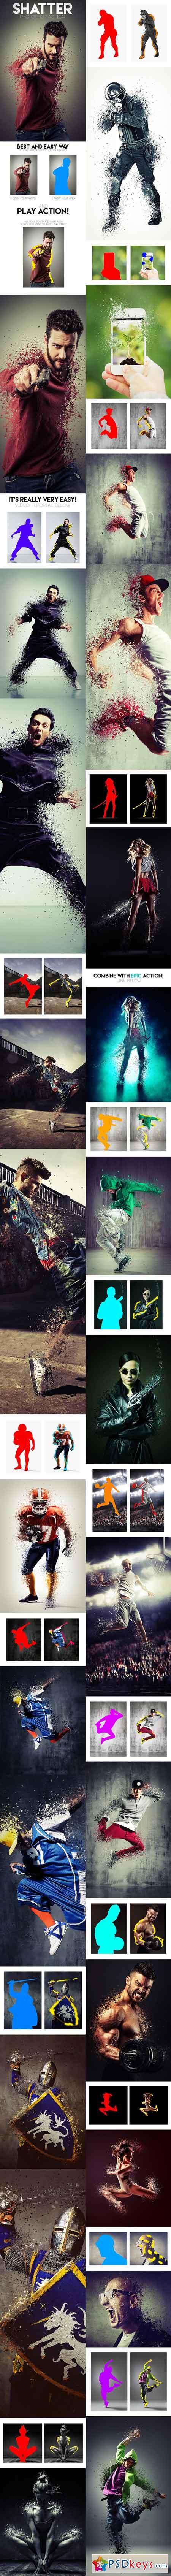 Shatter Photoshop Action 13977140